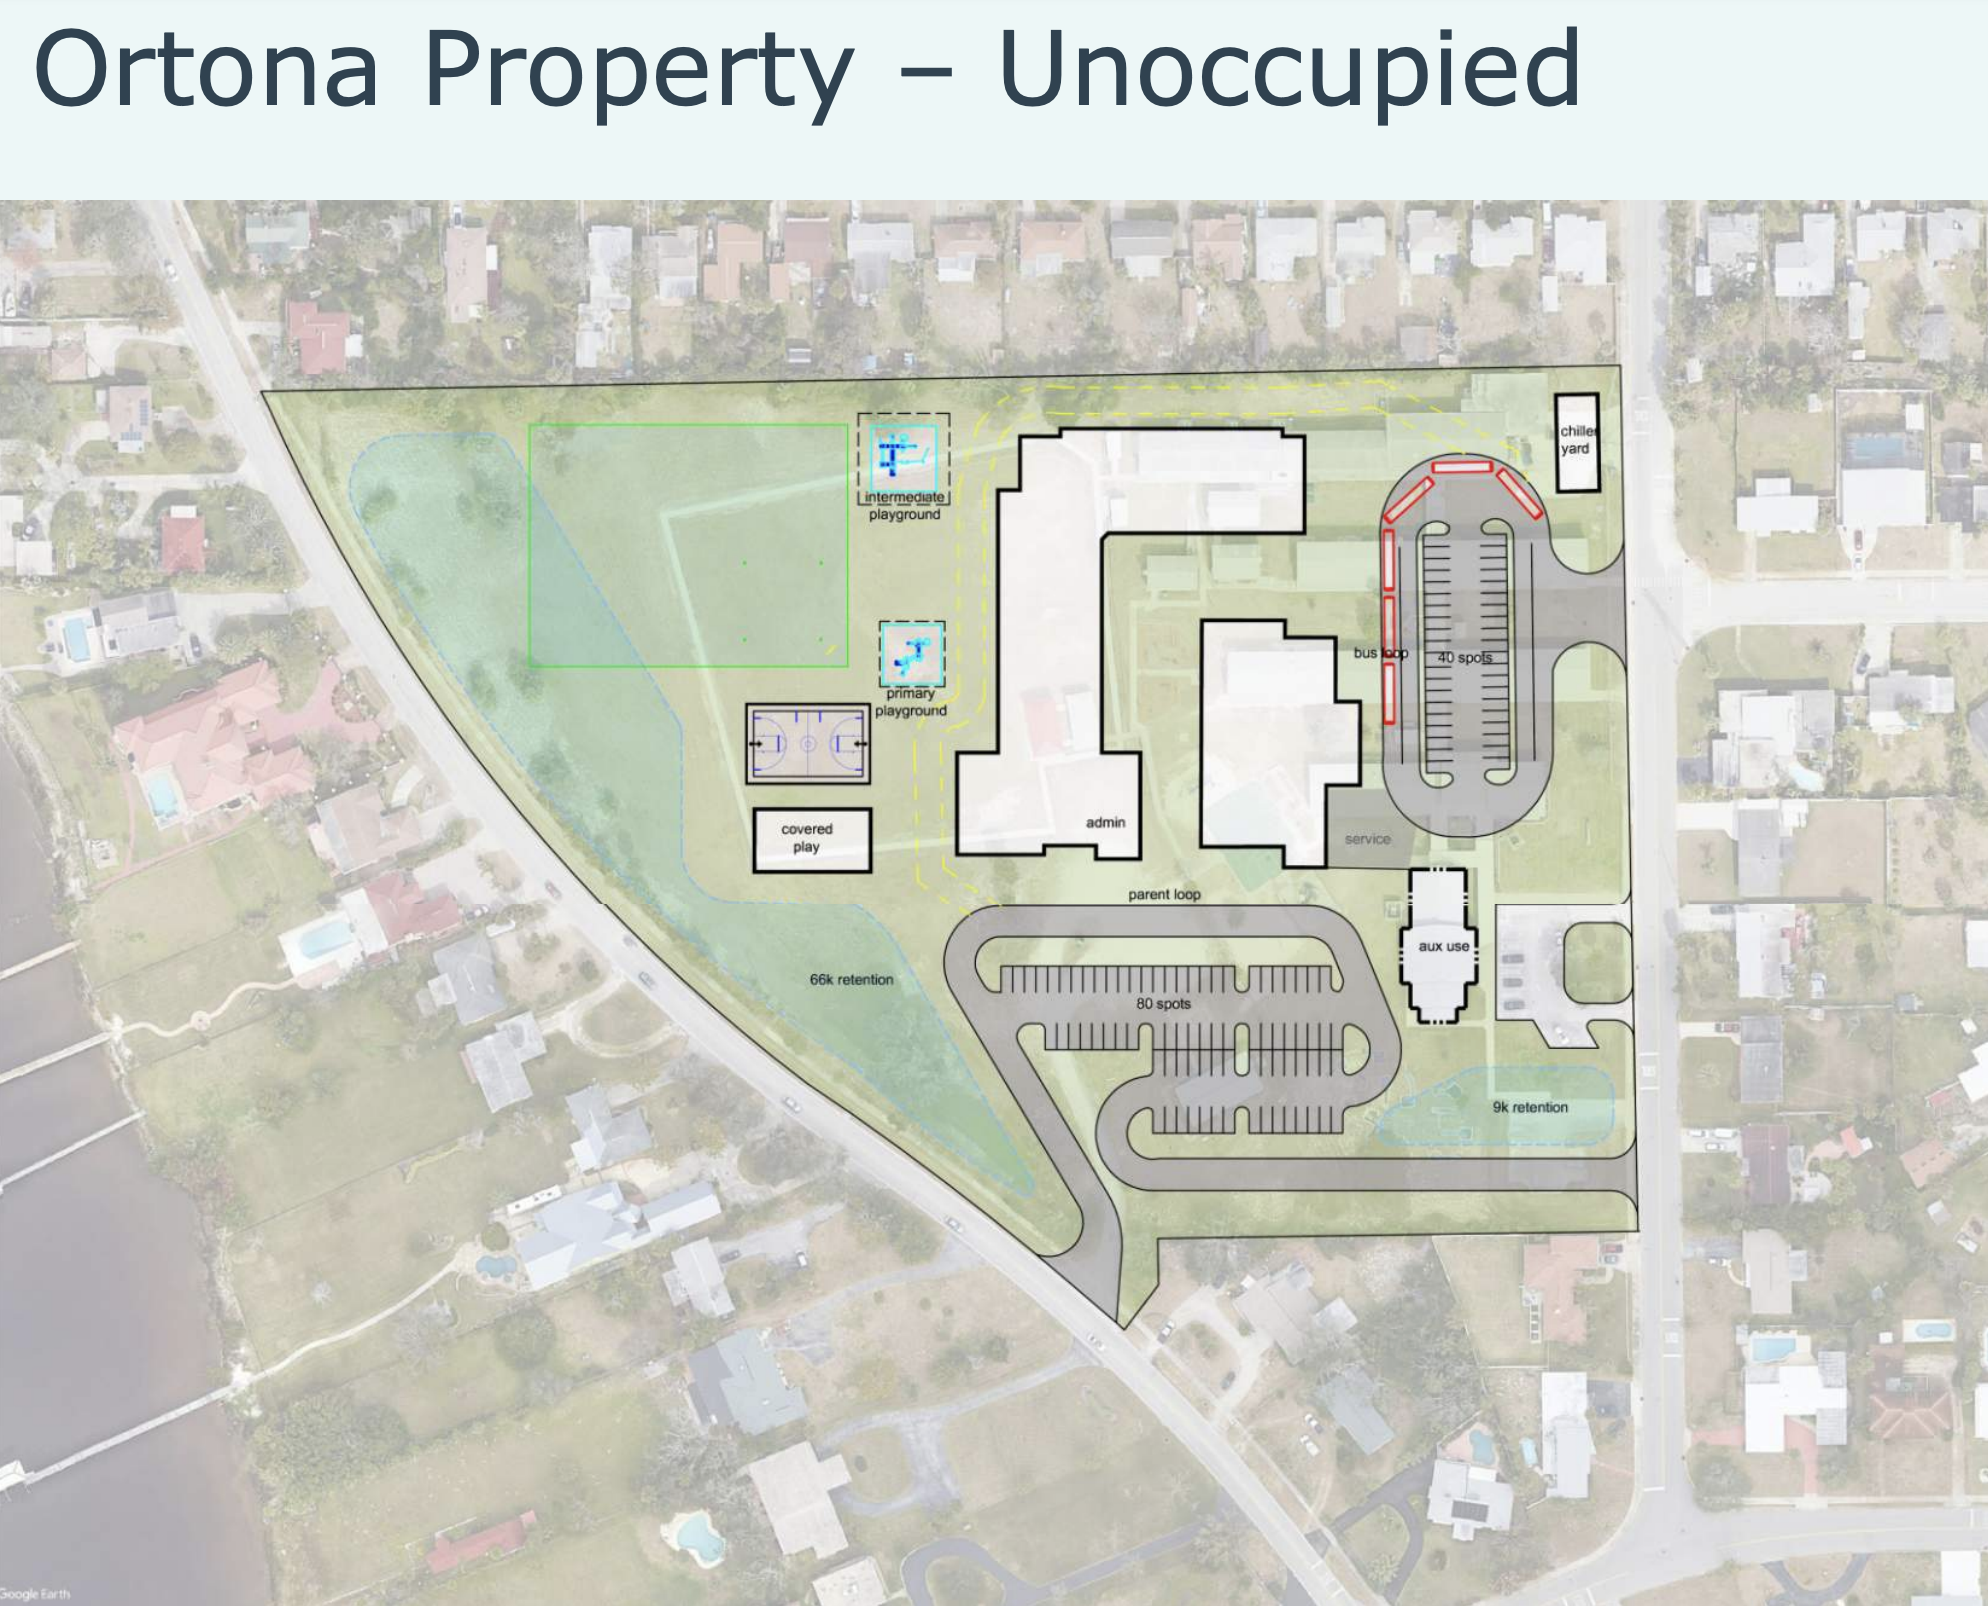 A plan showing what building on an unoccupied campus at Ortona would look like. Courtesy of Volusia County Schools/BRPH